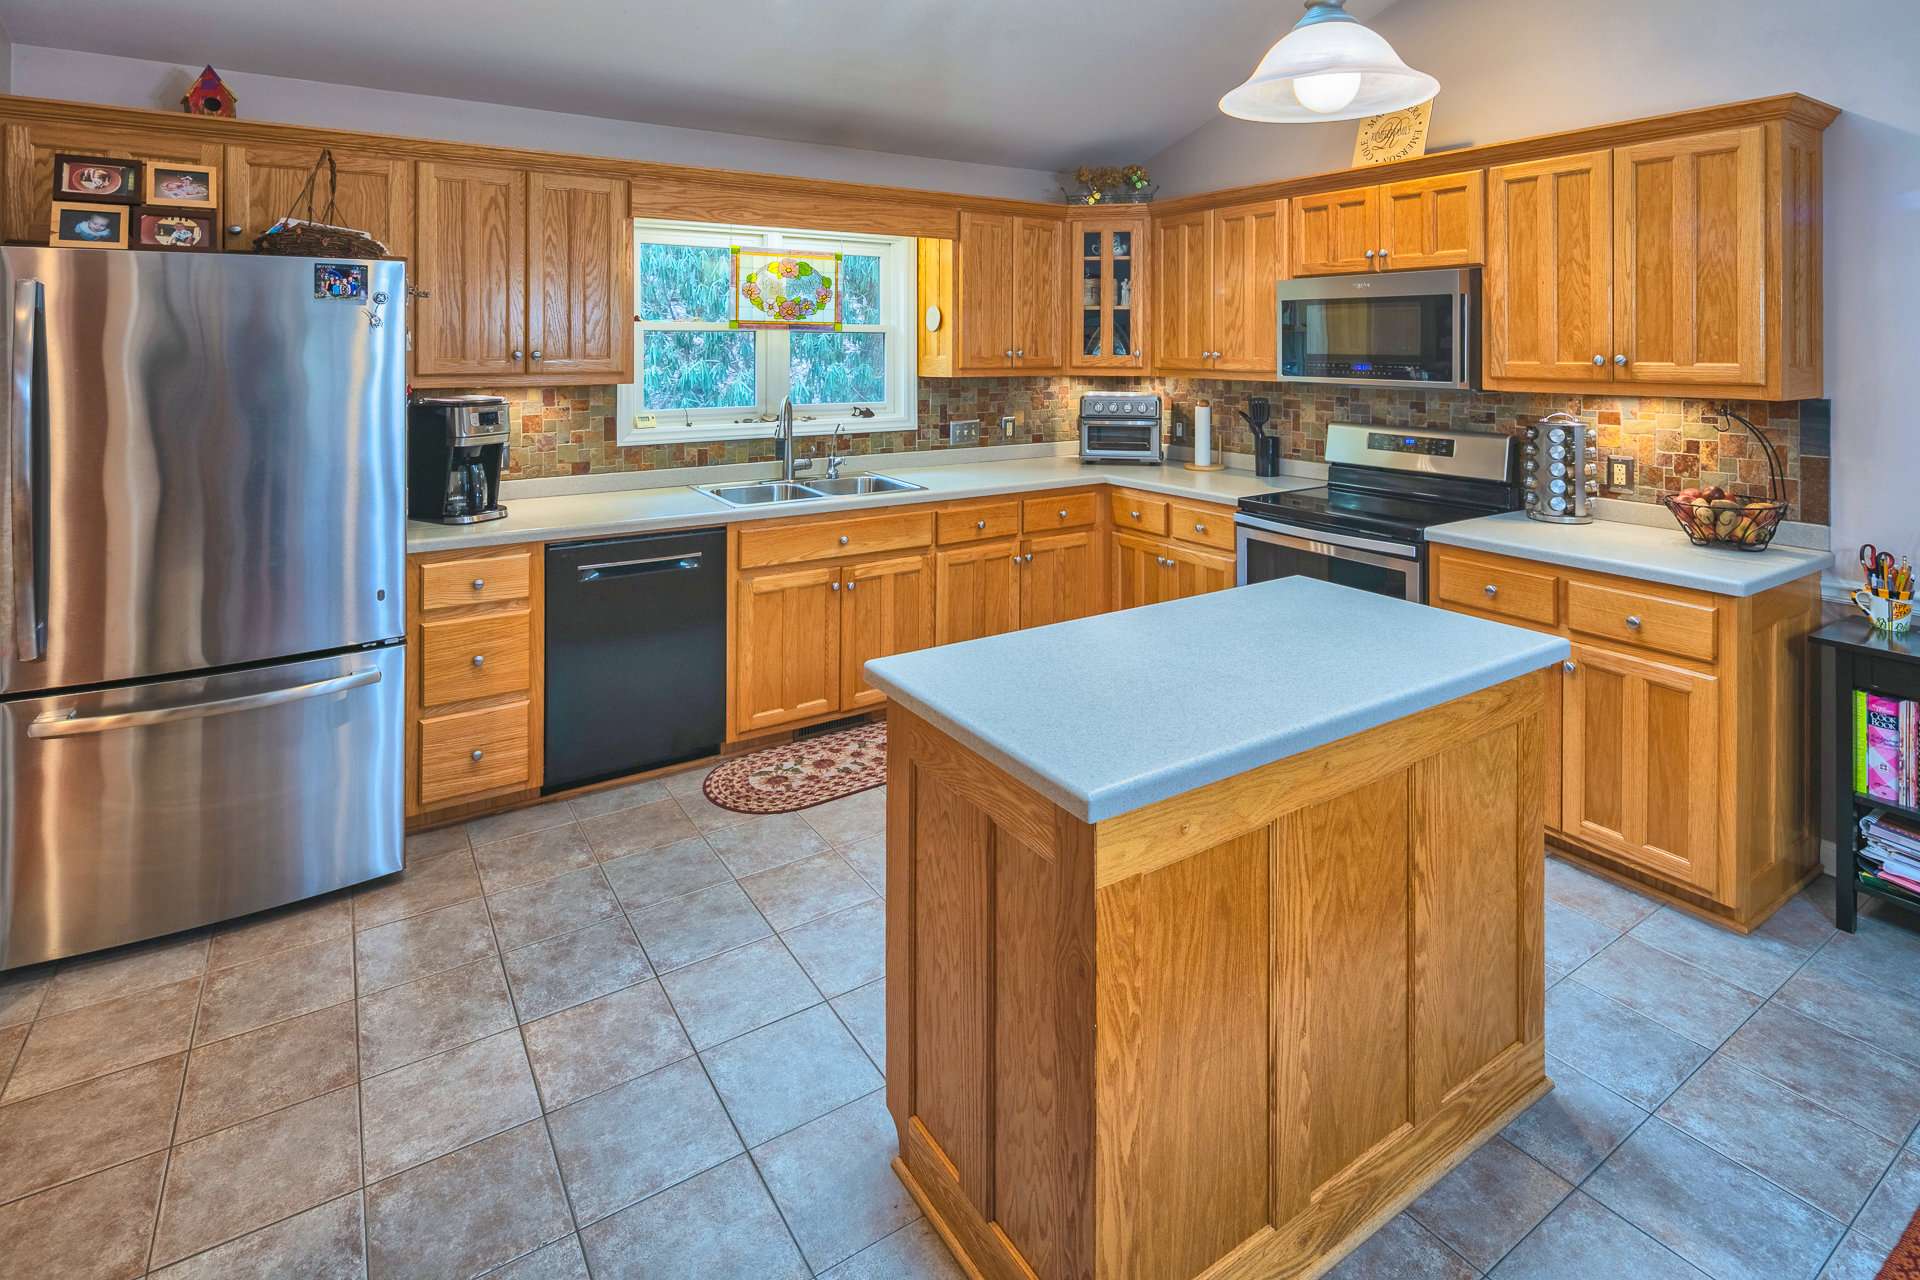 The kitchen also offers plenty of work and storage space with solid surface countertops, a center island, and ceramic tile flooring.